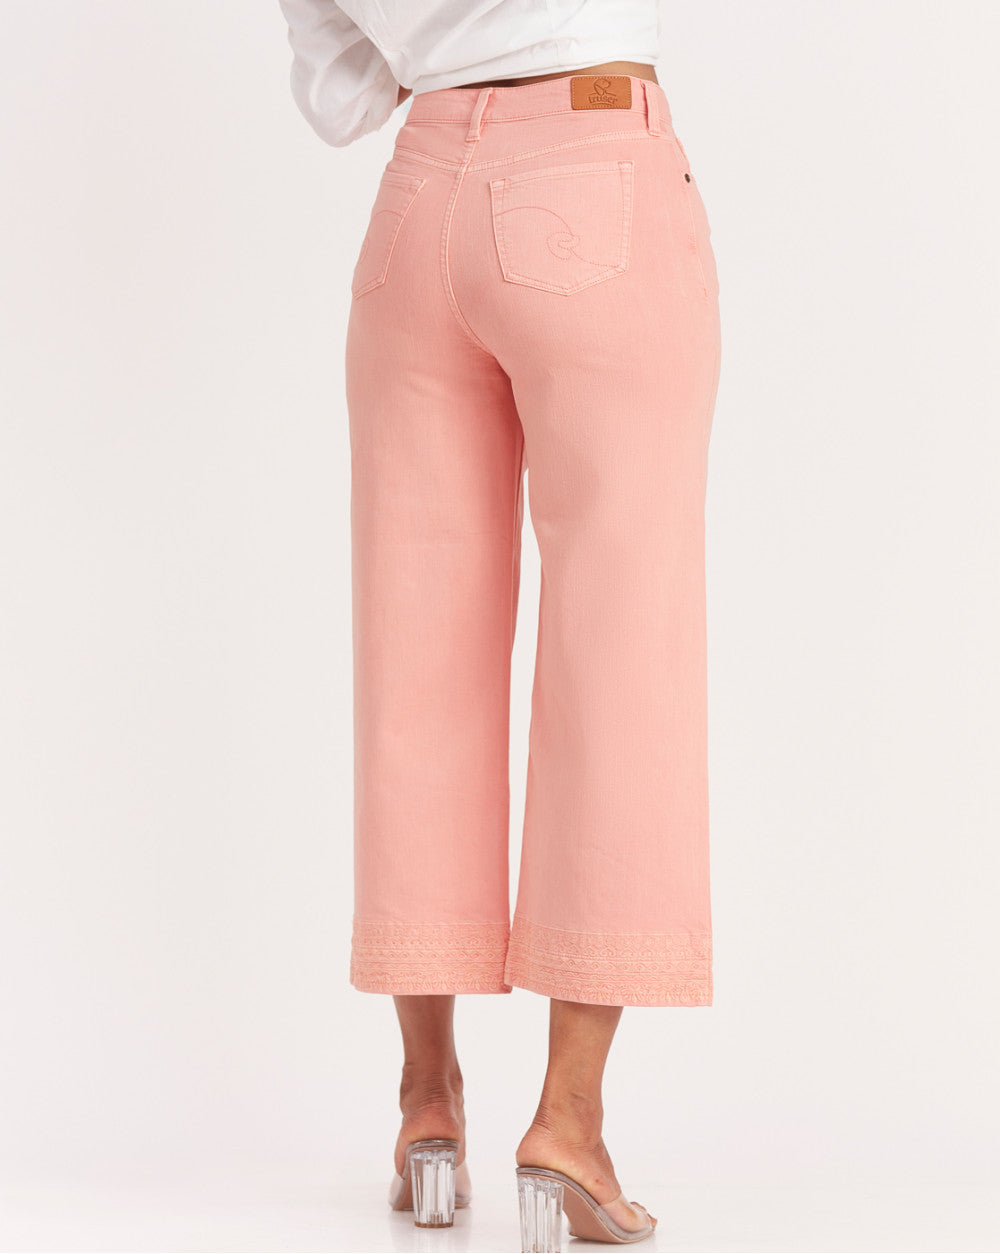 Wide Leg High Waist Boho Embroidered Colored Jeans - Coral